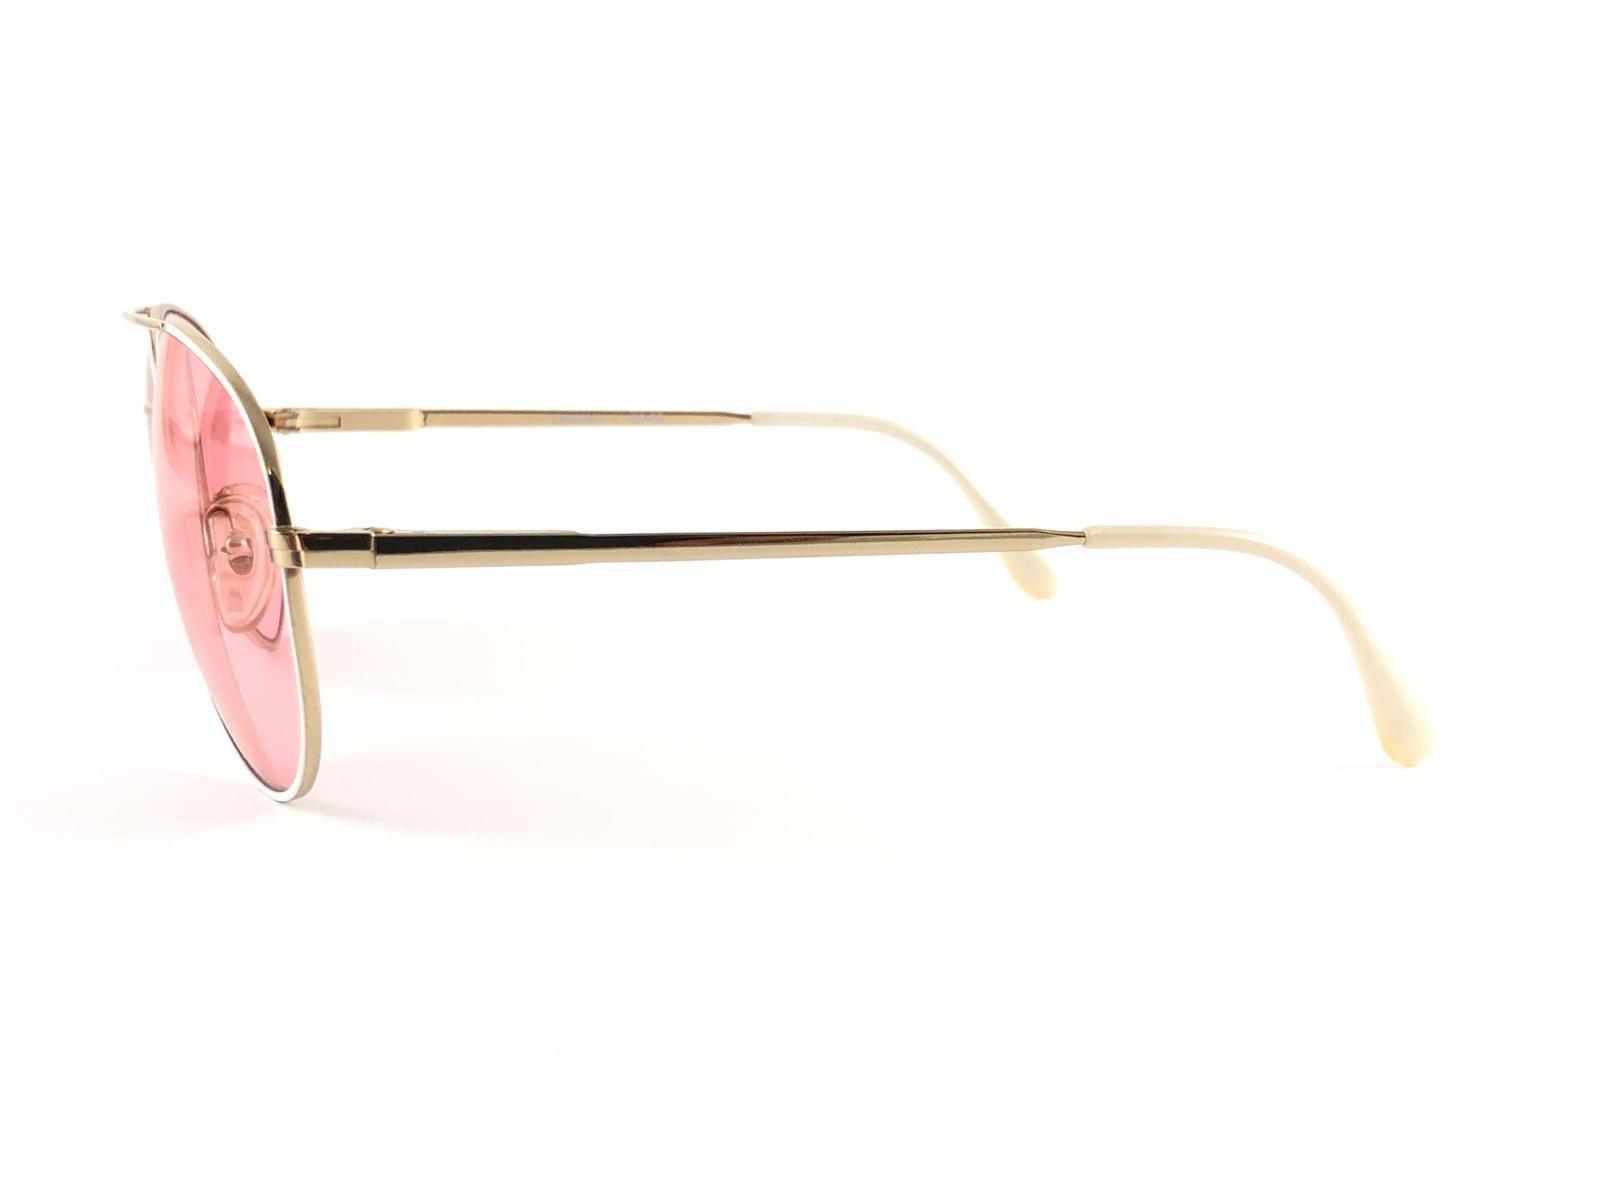 New Vintage Omega Aviator White & Gold Sunglasses 1980's Made in Belgium In New Condition For Sale In Baleares, Baleares